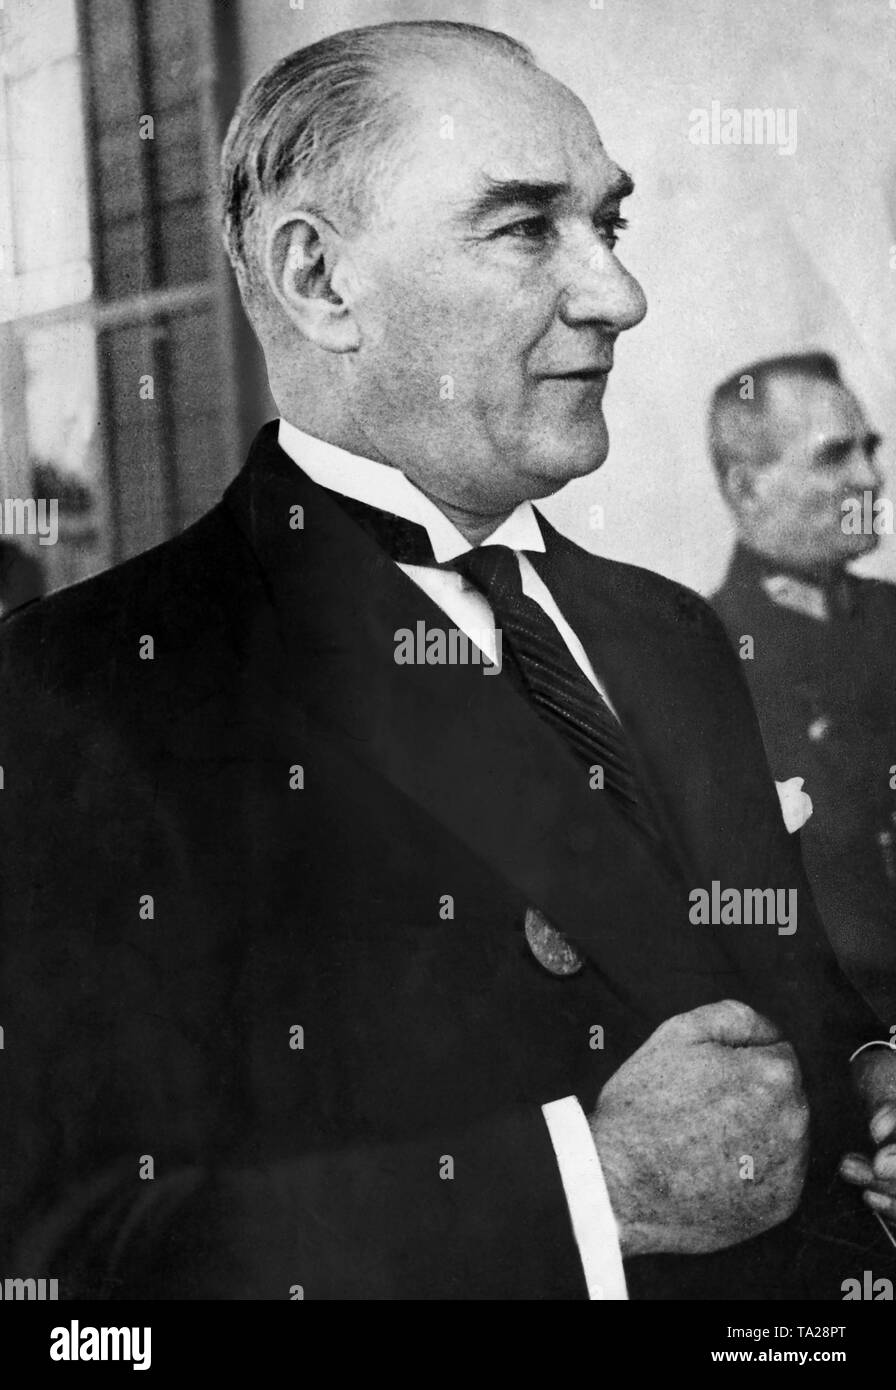 Mustafa Kemal Ataturk (1881-1938, until 1934 Mustafa Kemal Pasha), Turkish politician. In 1922 he abolished the Sultanate and the Caliphate and proclaimed the republic. Starting 1923 he was the first President of Turkey. Stock Photo